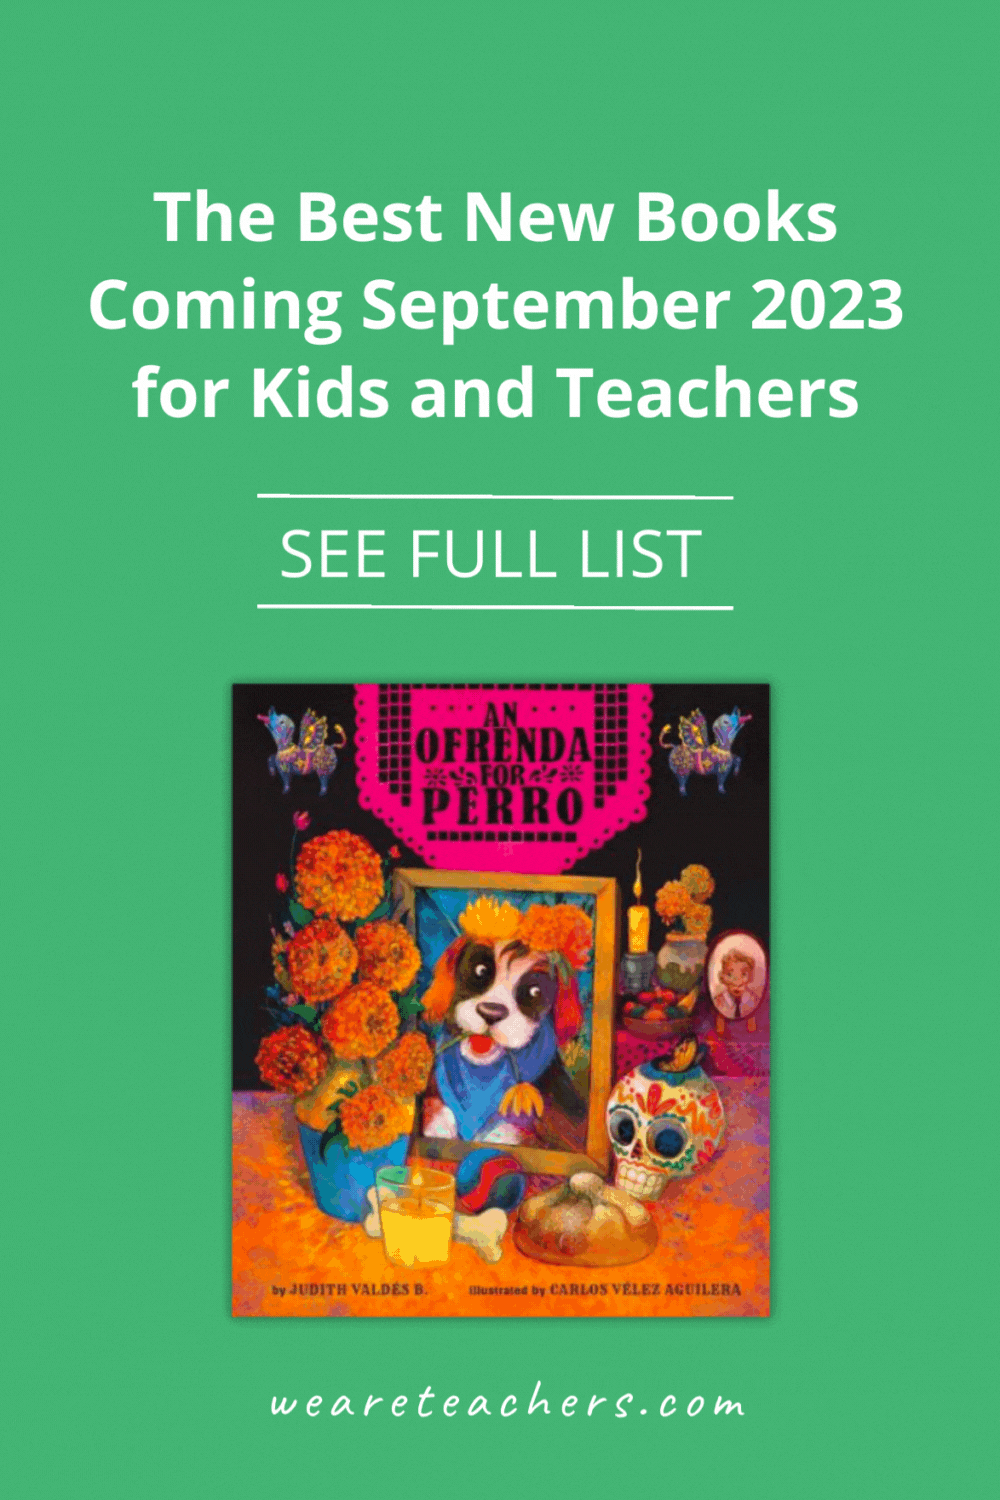 Find all the best new books for September 2023, including picture books, easy readers, middle grade, YA, and books for teachers.